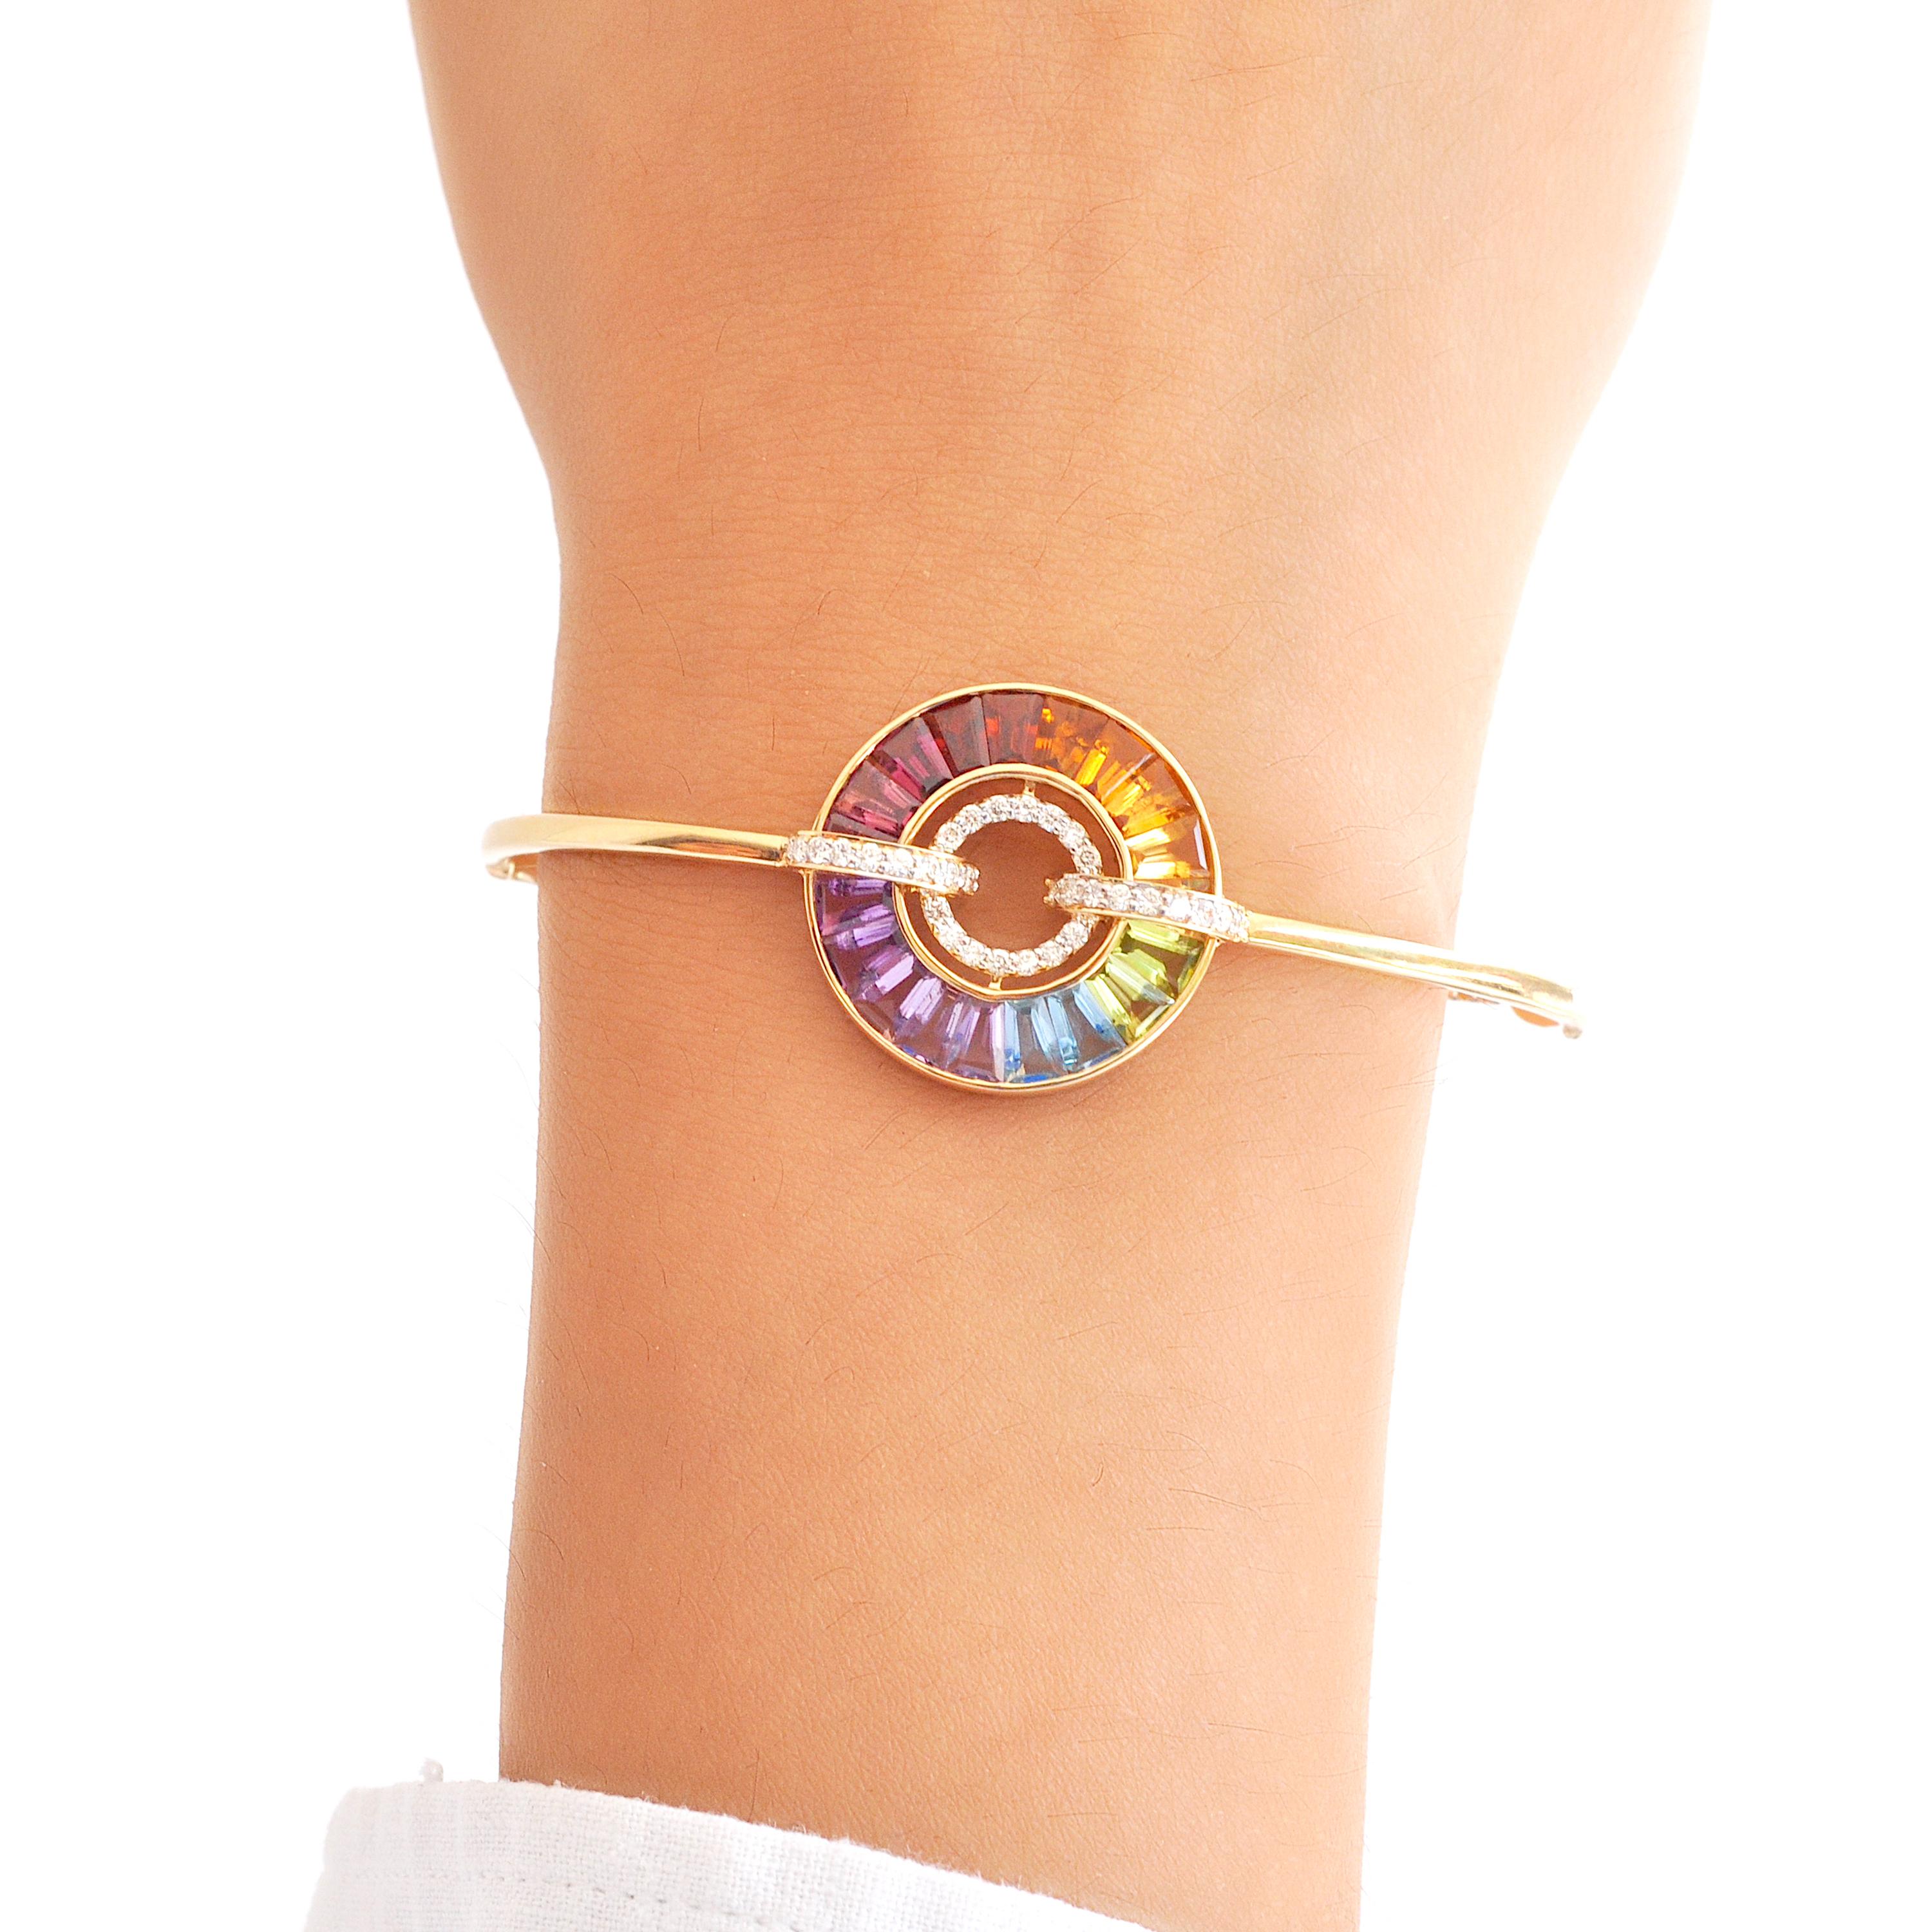 18 karat gold channel set rainbow baguette gemstones diamond circle bolo bracelet

This bracelet is a radiant celebration of color and elegance. Crafted with meticulous precision, this bracelet features a stunning arrangement of vibrant rainbow